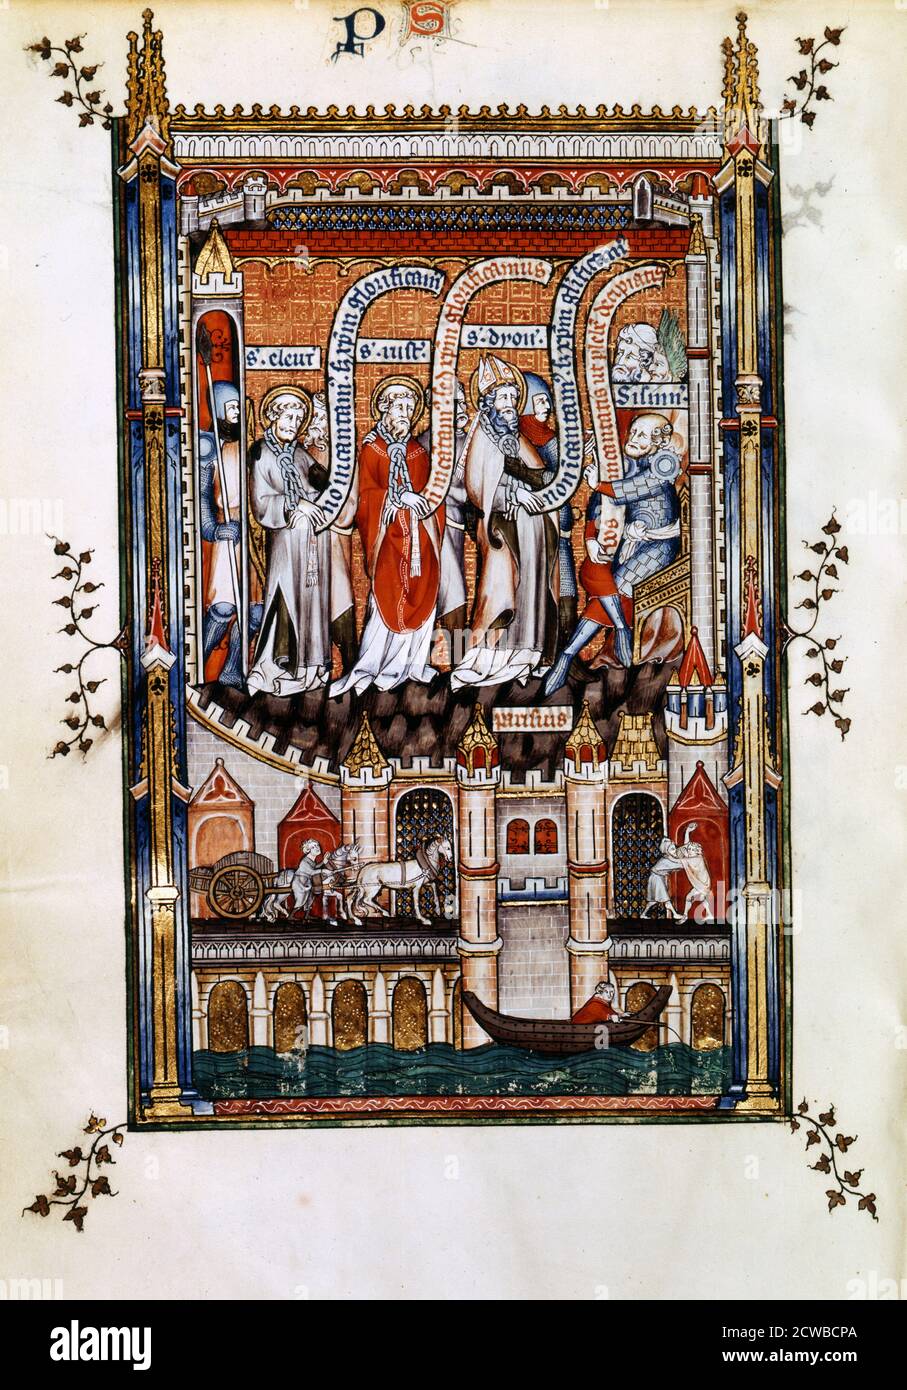 St Denis before Sissinius, 1317. The saint and his companions St Eleutherius and St Rusticus, are brought before Sisinnius in chains. Manuscript illustration from a work on the life of St Denis (died c258 AD), written by Yves, a monk at the Abbey of St Denis. The book depicts the torture and martyrdom of the saint by the Roman governor Fescenninus Sisinnius. The lower scene depicts people on the bridge over the River Seine; showing a cart loaded with barrels, two men fighting, and a man fishing with a rod. From the collection of the Bibliotheque Nationale, Paris. The artist is unknown. Stock Photo